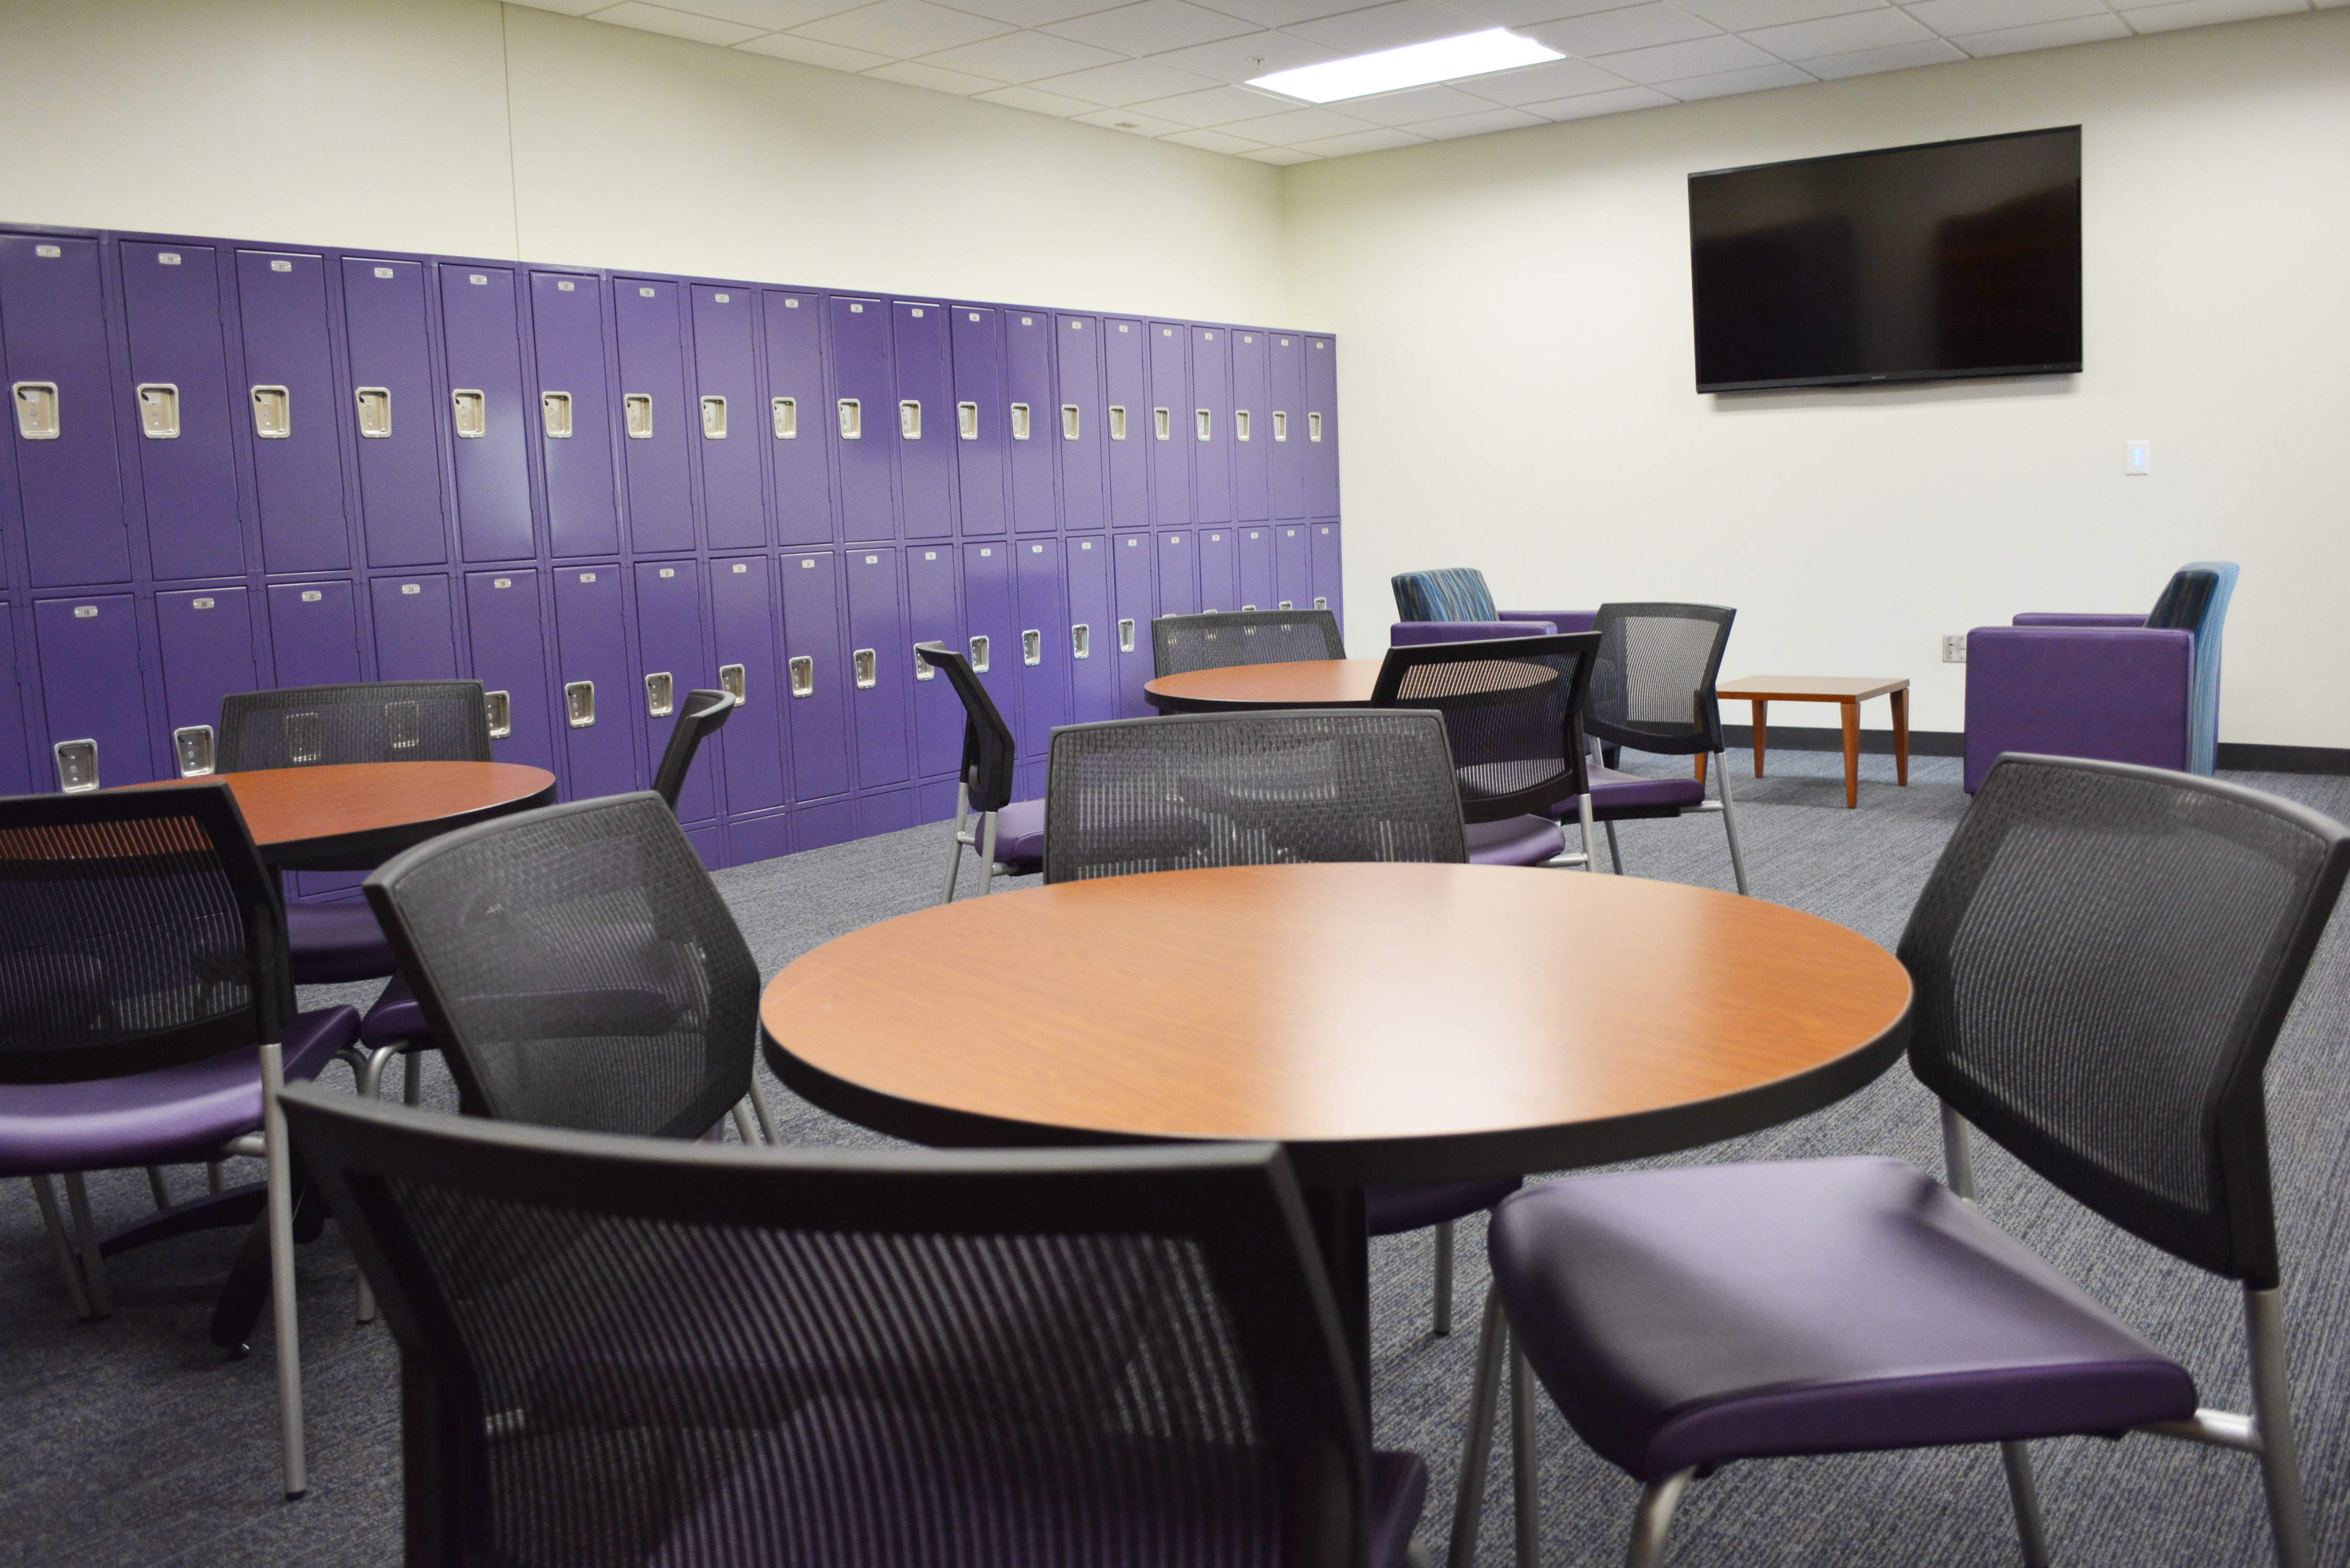 Mount Union Physical Therapy Student Lounge